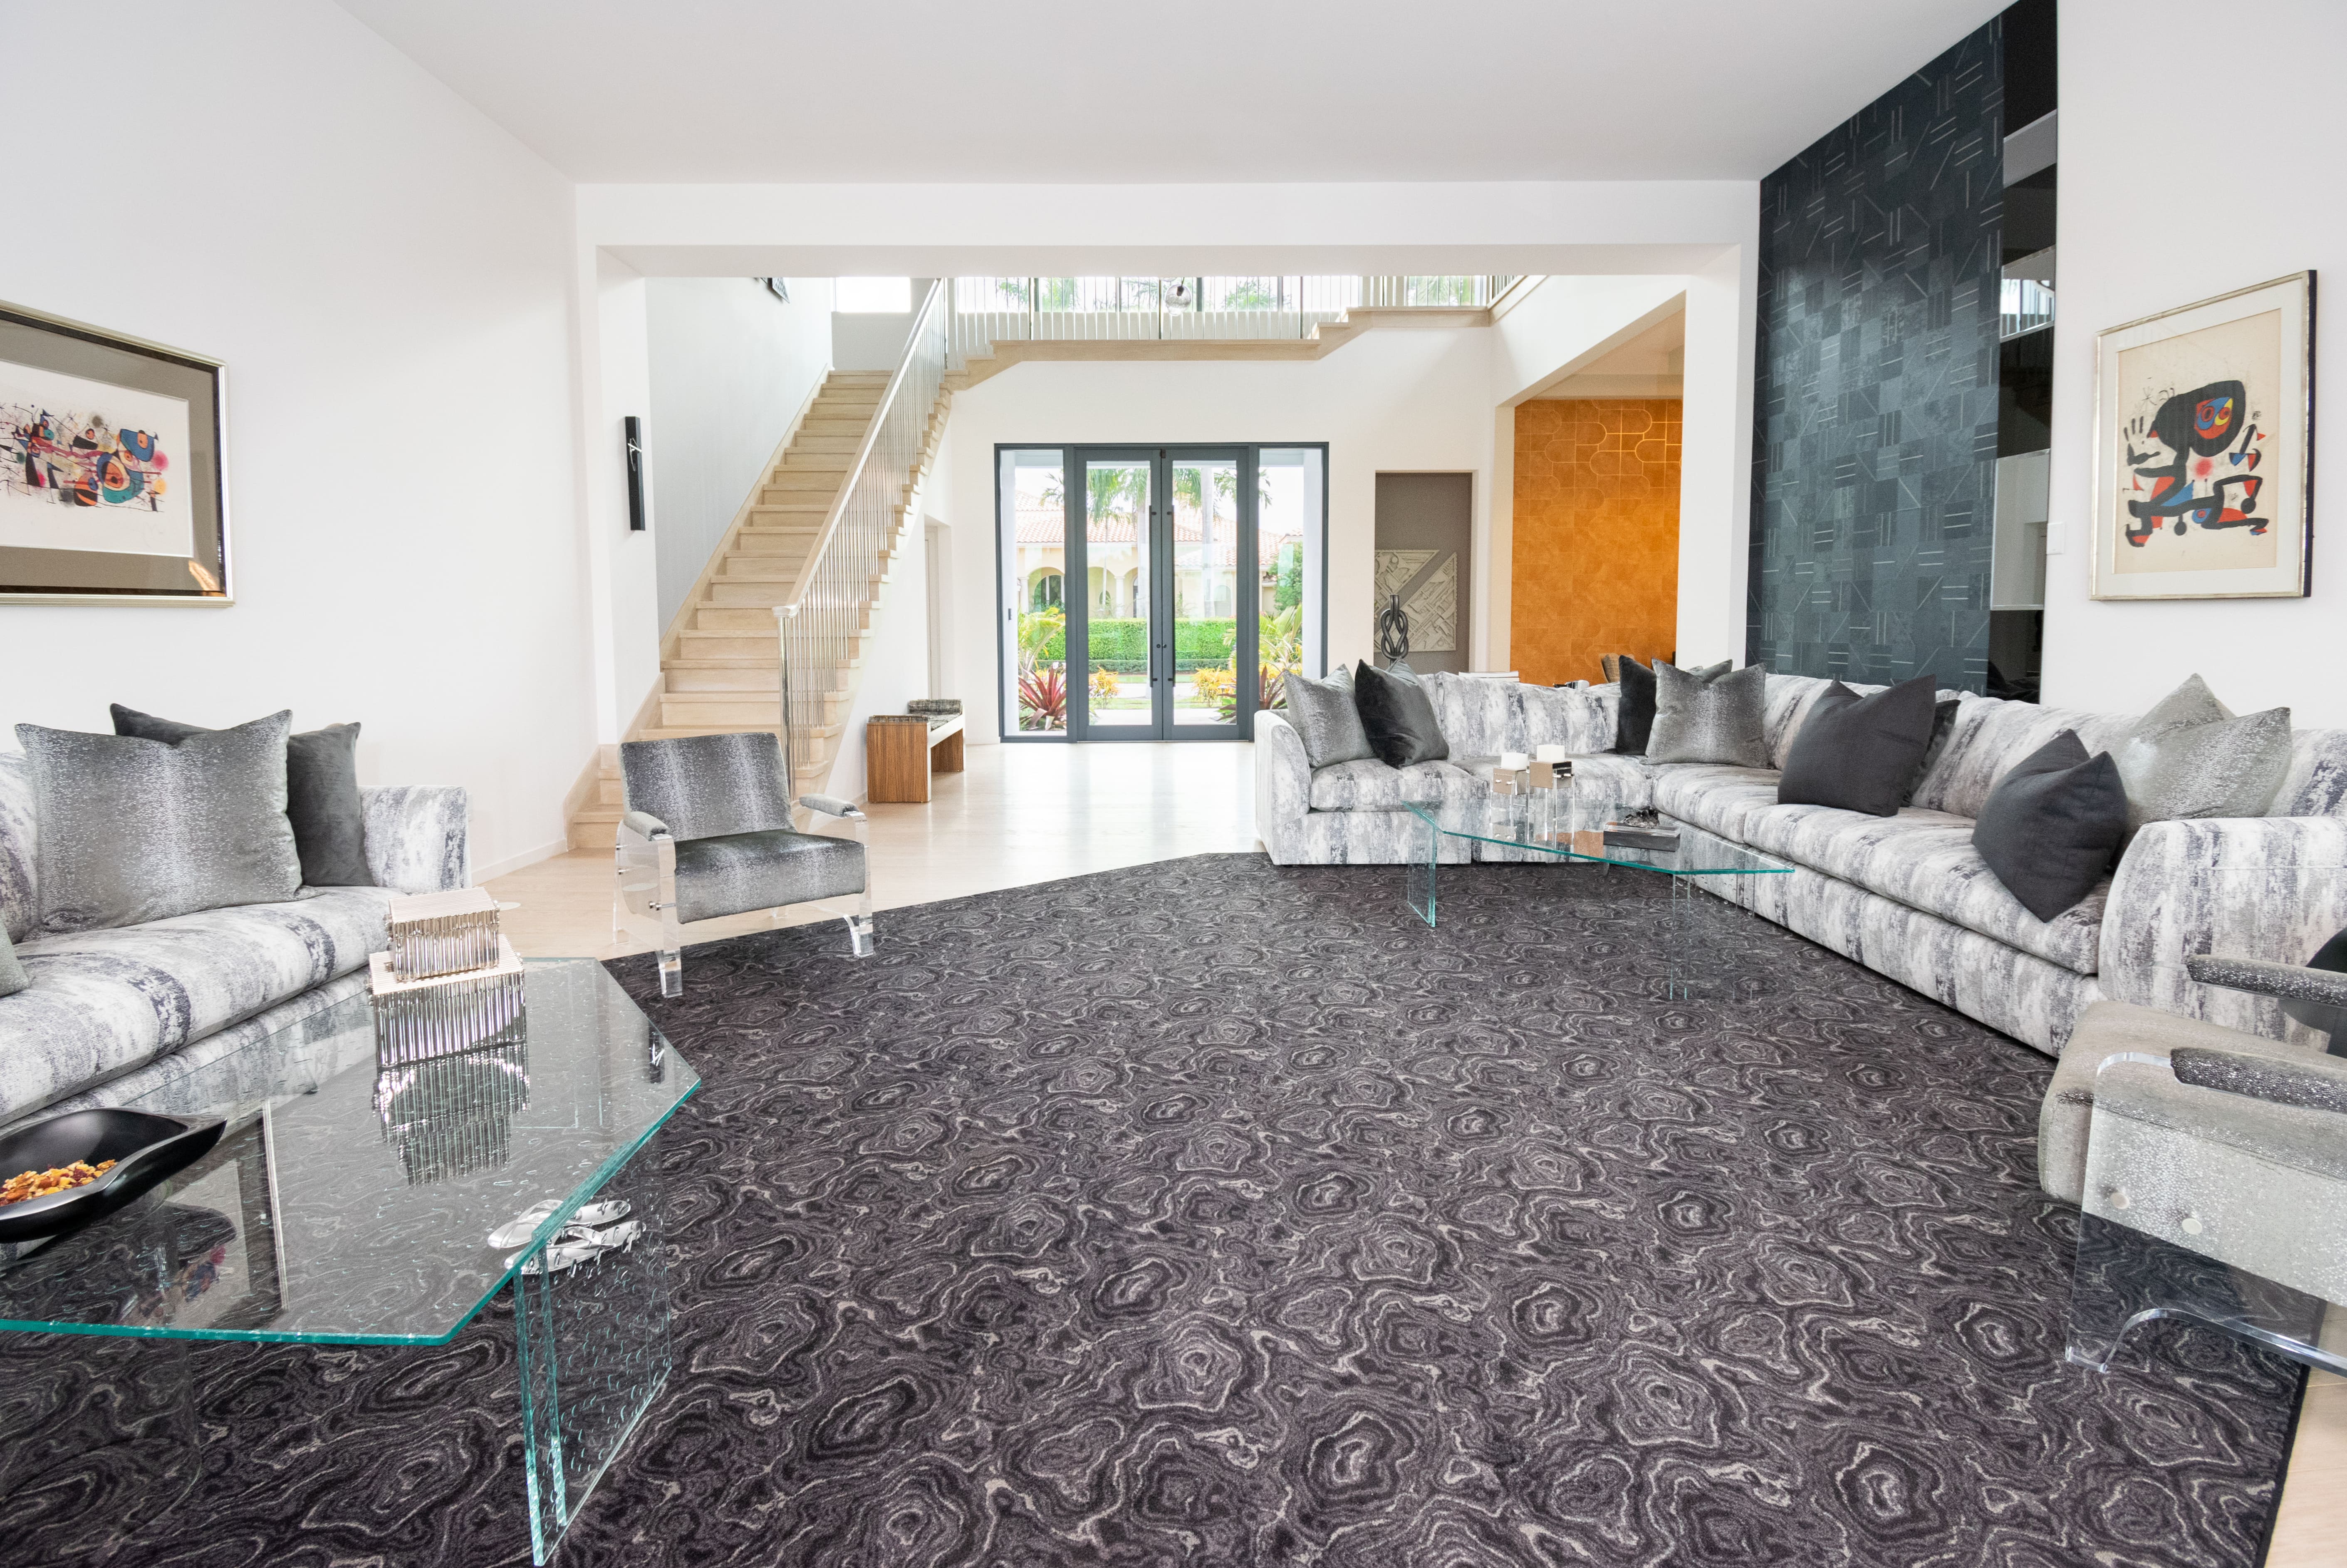 Example of luxurious handcrafted wall-to-wall inlayed carpet installation.